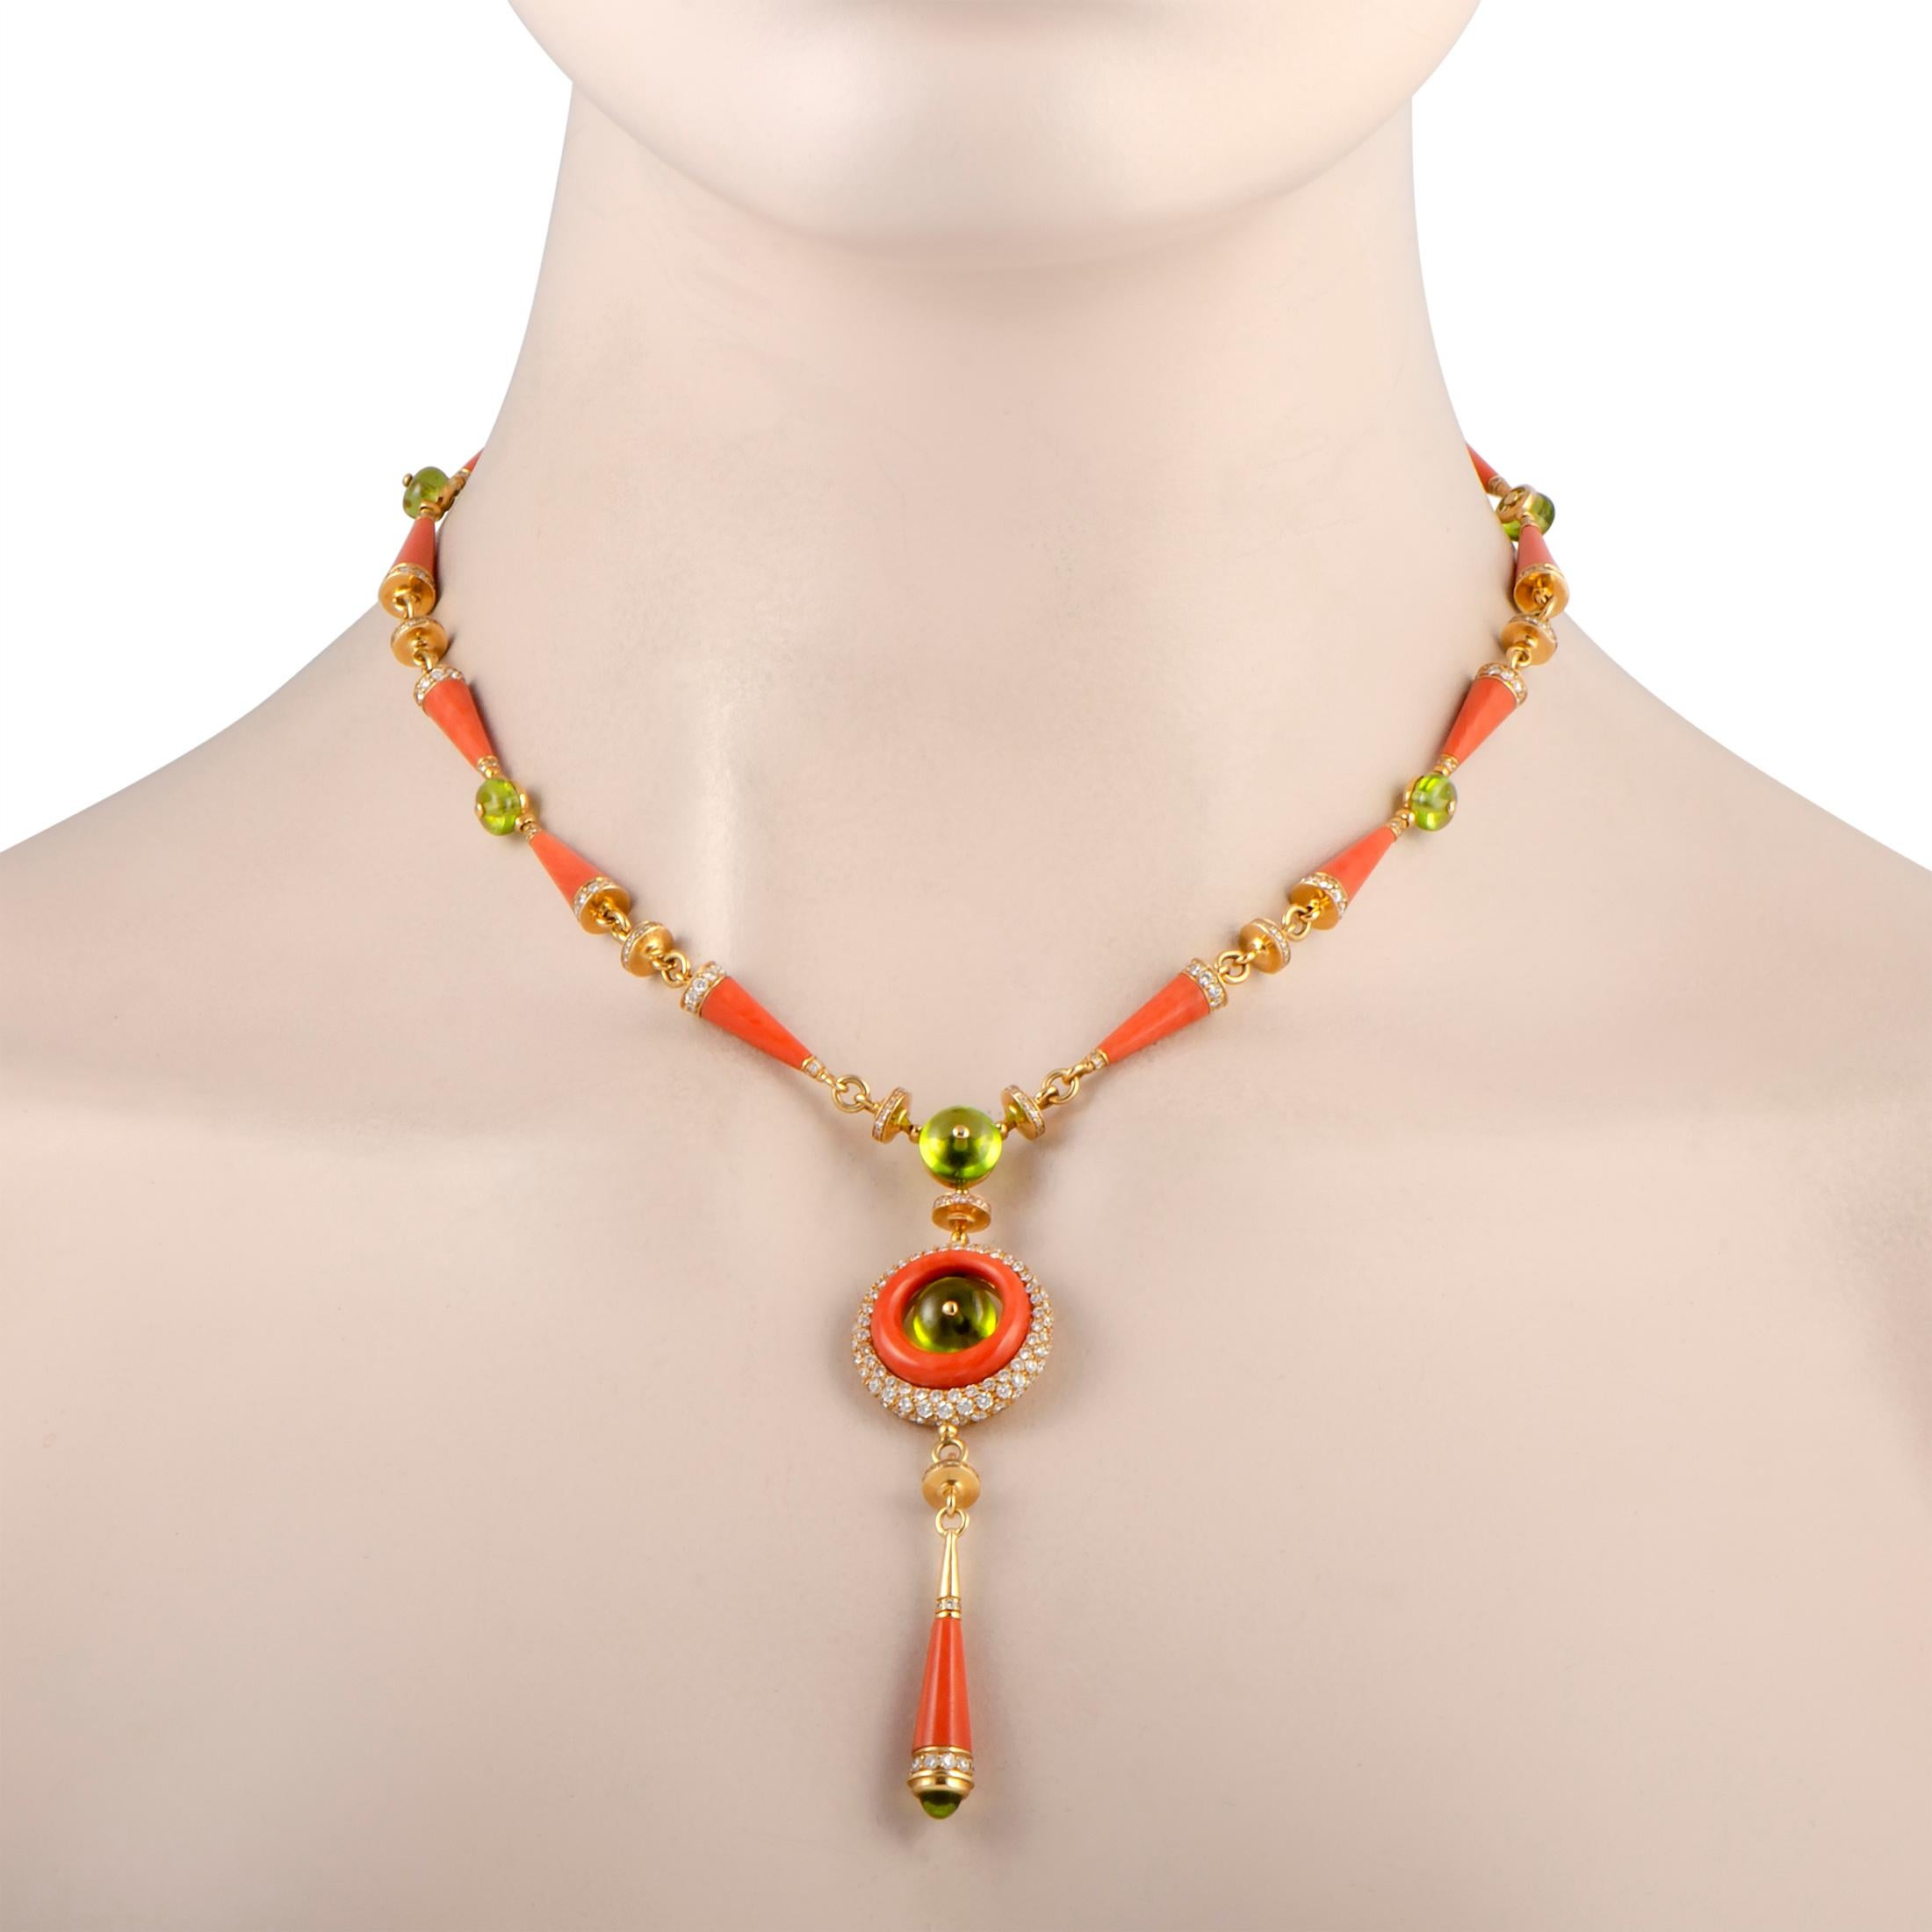 This Bvlgari necklace is made of 18K yellow gold and set with peridot, coral and diamonds.

The necklace weighs 55.3 grams and boasts chain length of 16.00”, with a pendant that measures 3.00” in length and 1.00” in width.

The necklace is offered